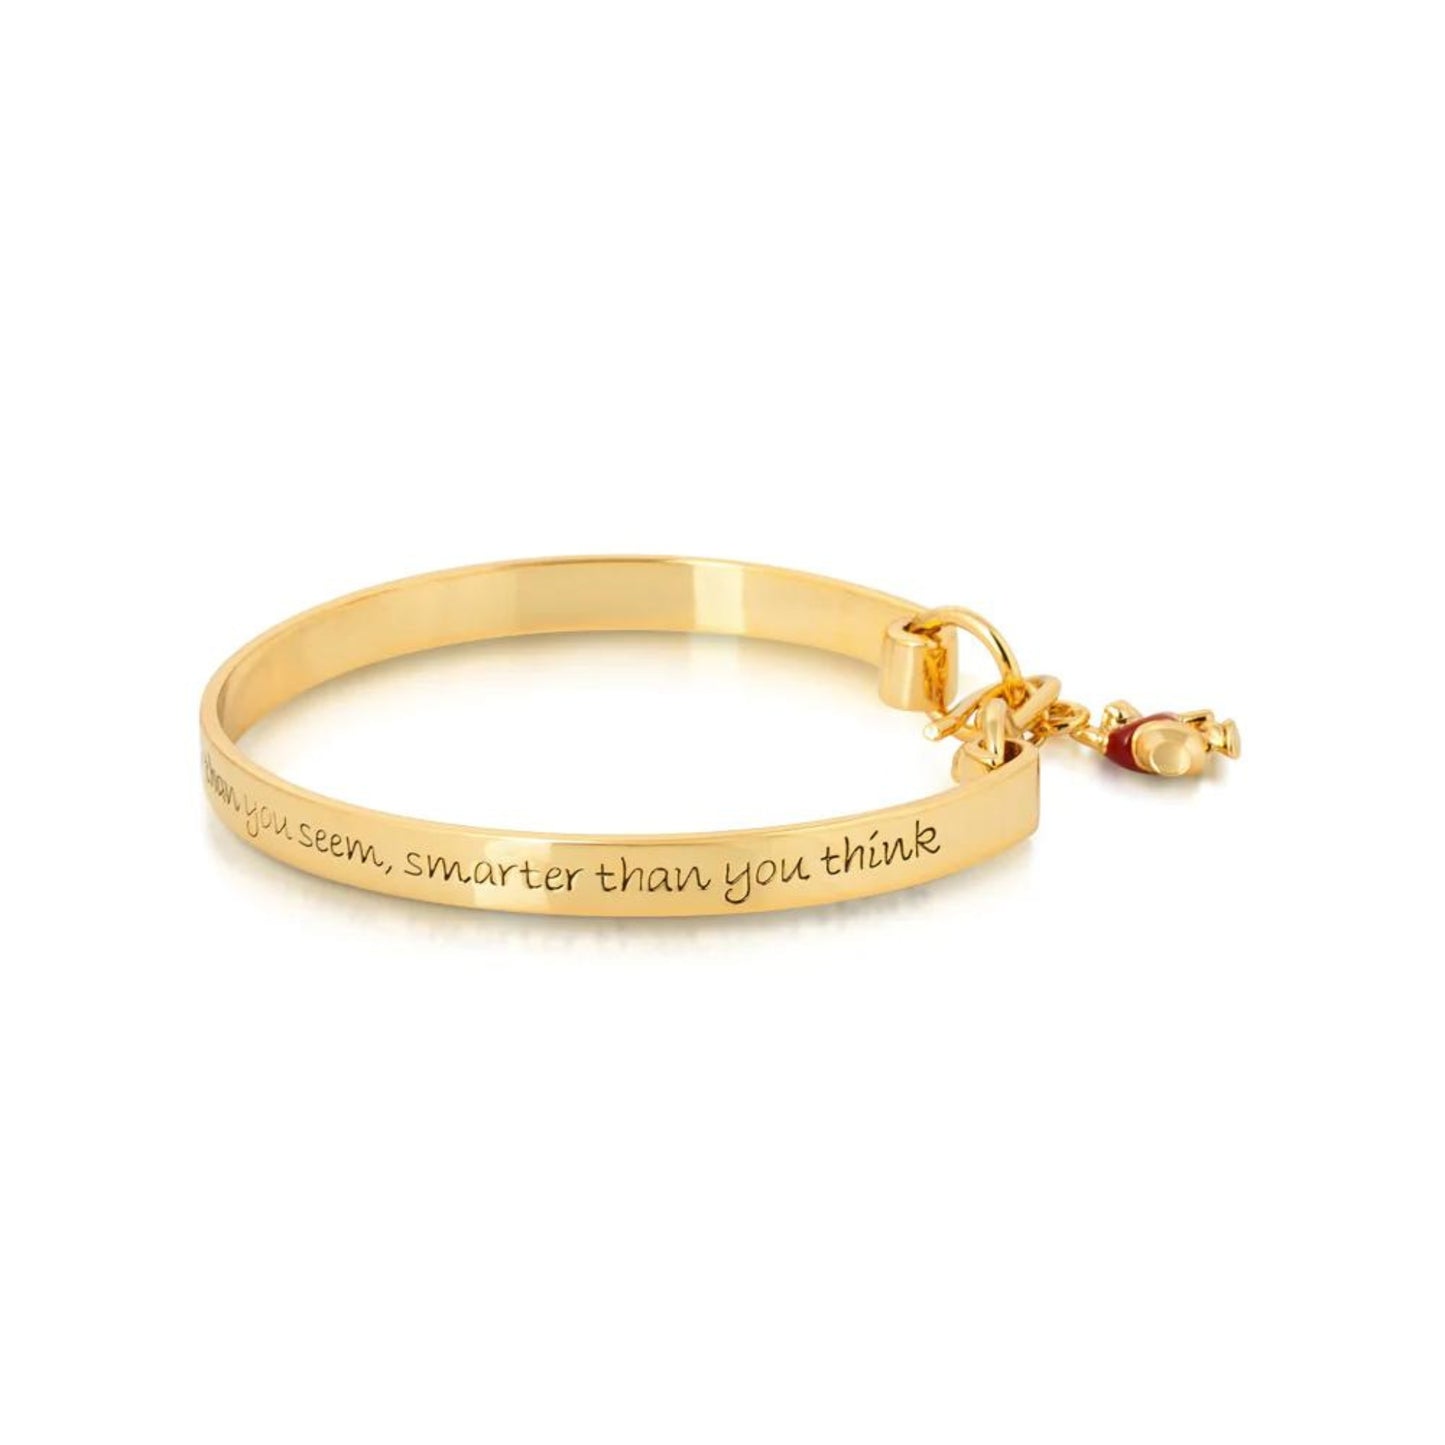 Winnie the Pooh Bracelet Inspirational Gift for Women You are Braver Than  You Believe Bracelet for Teen Girls Friends Bear, Medium, Metal, Stainless  Steel : Amazon.com.be: Fashion